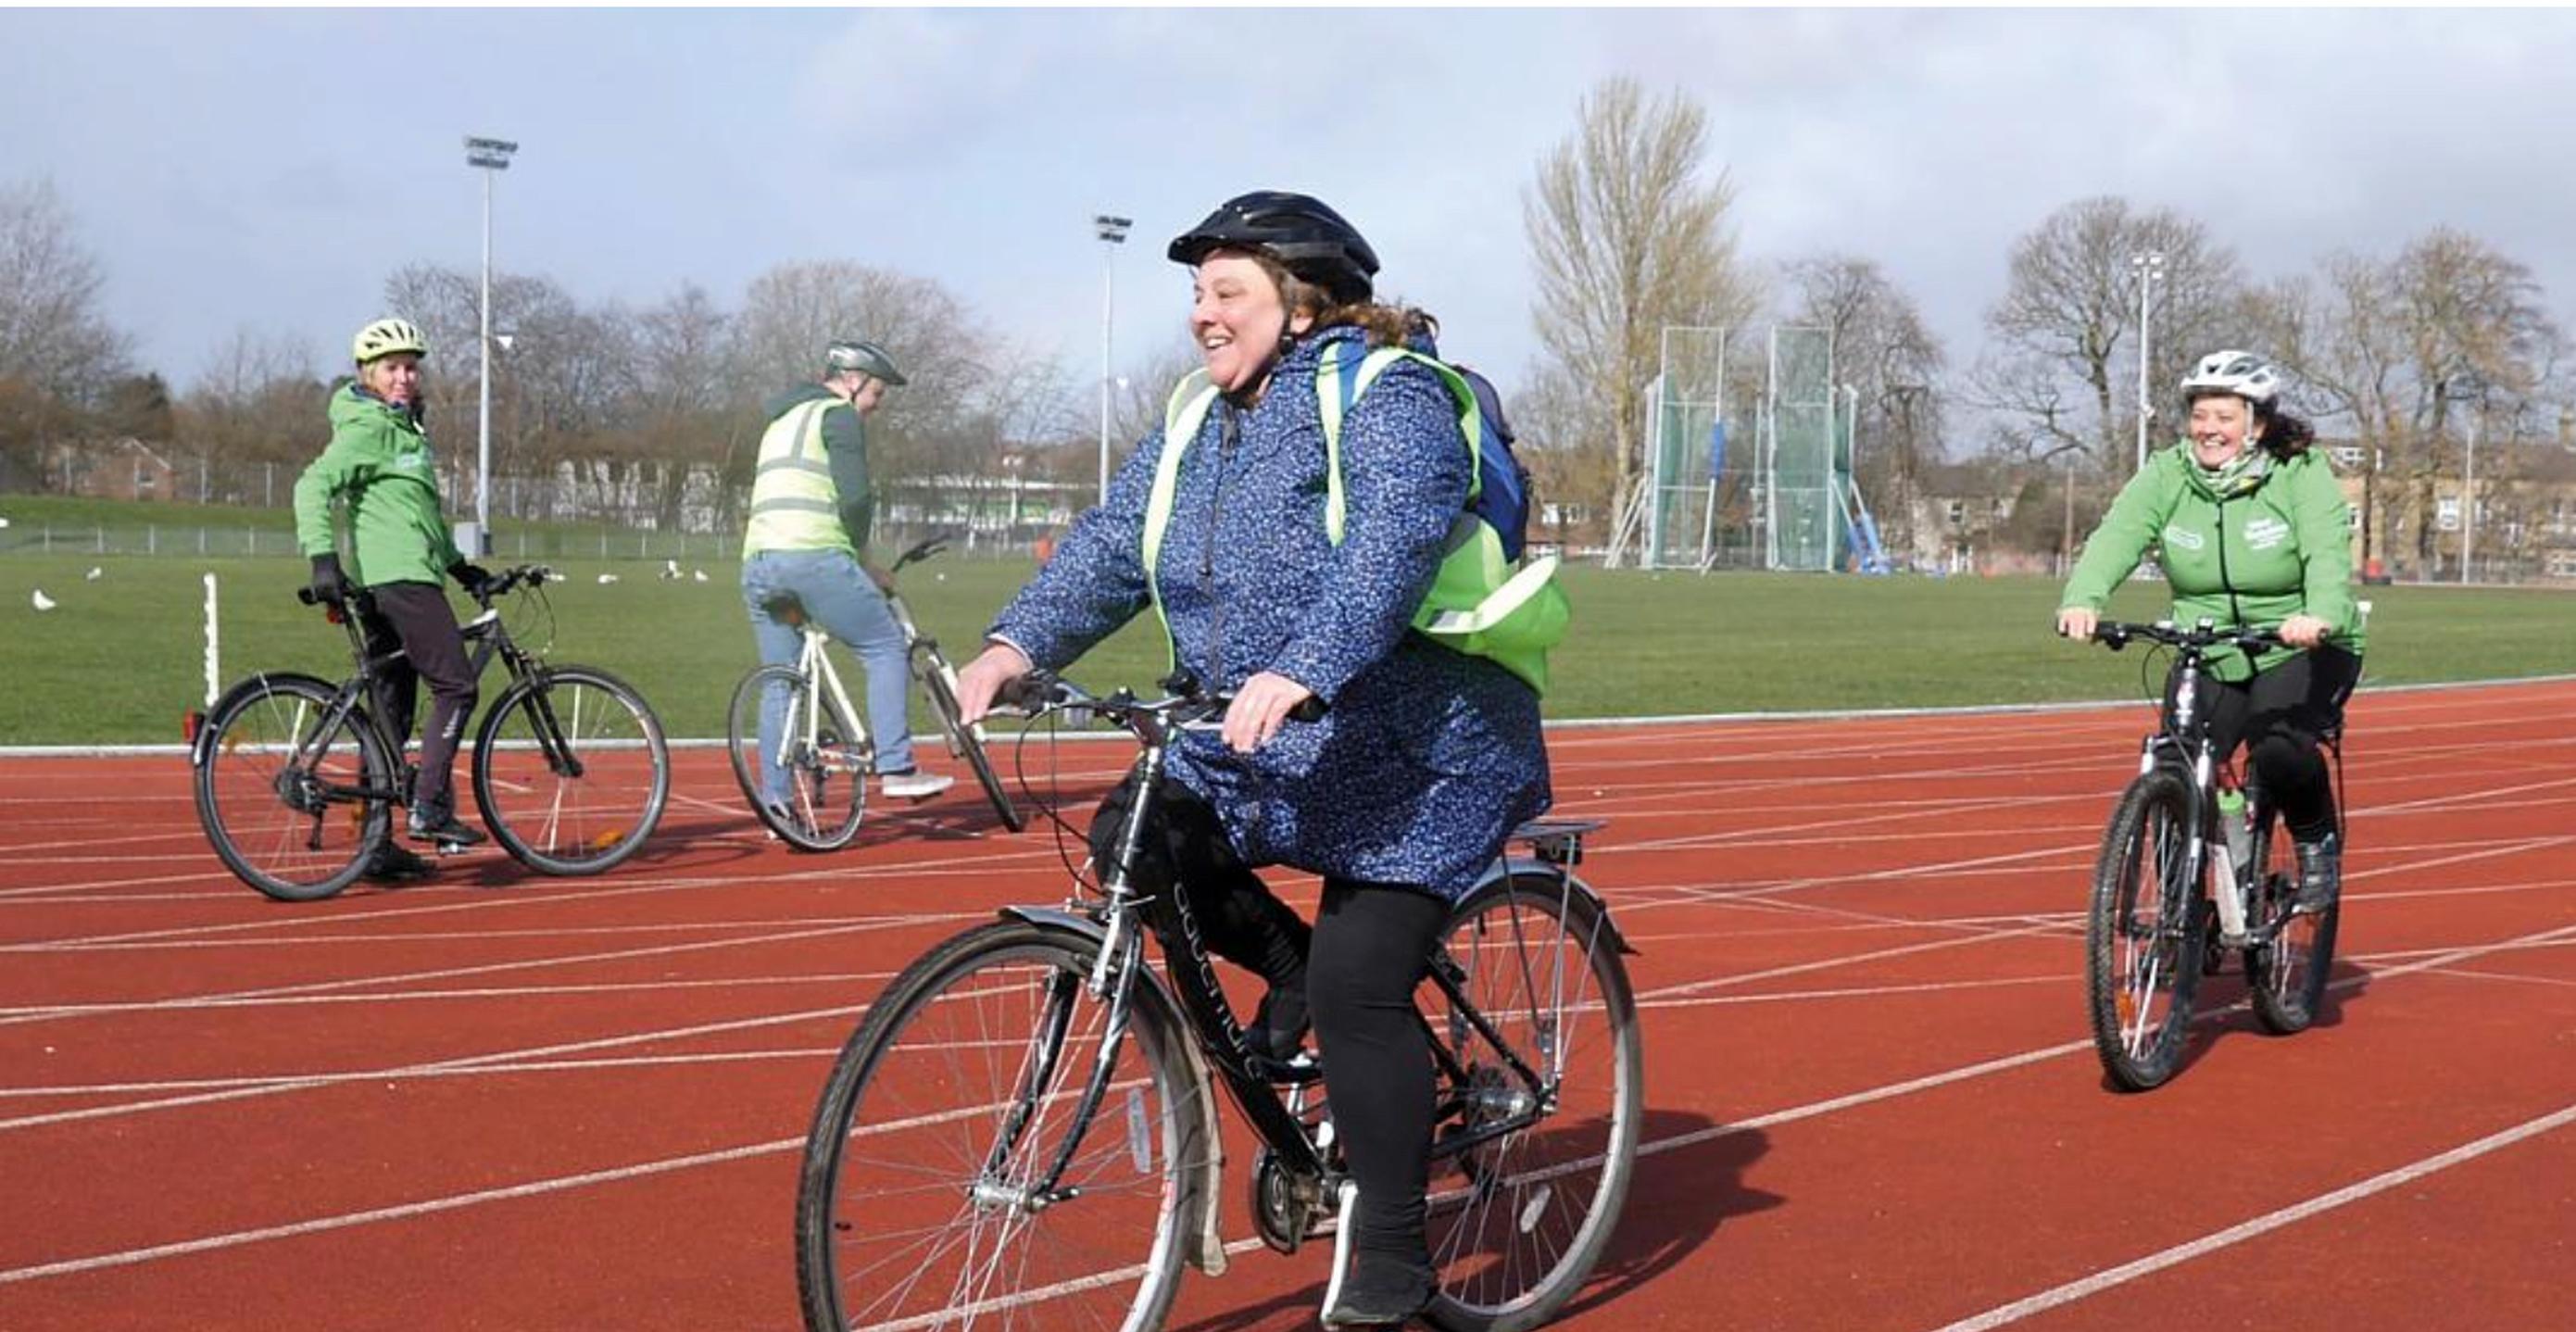 The first phase of Cycling UK`s Cycle for Health programme helped more than 1,000 people in West Yorkshire